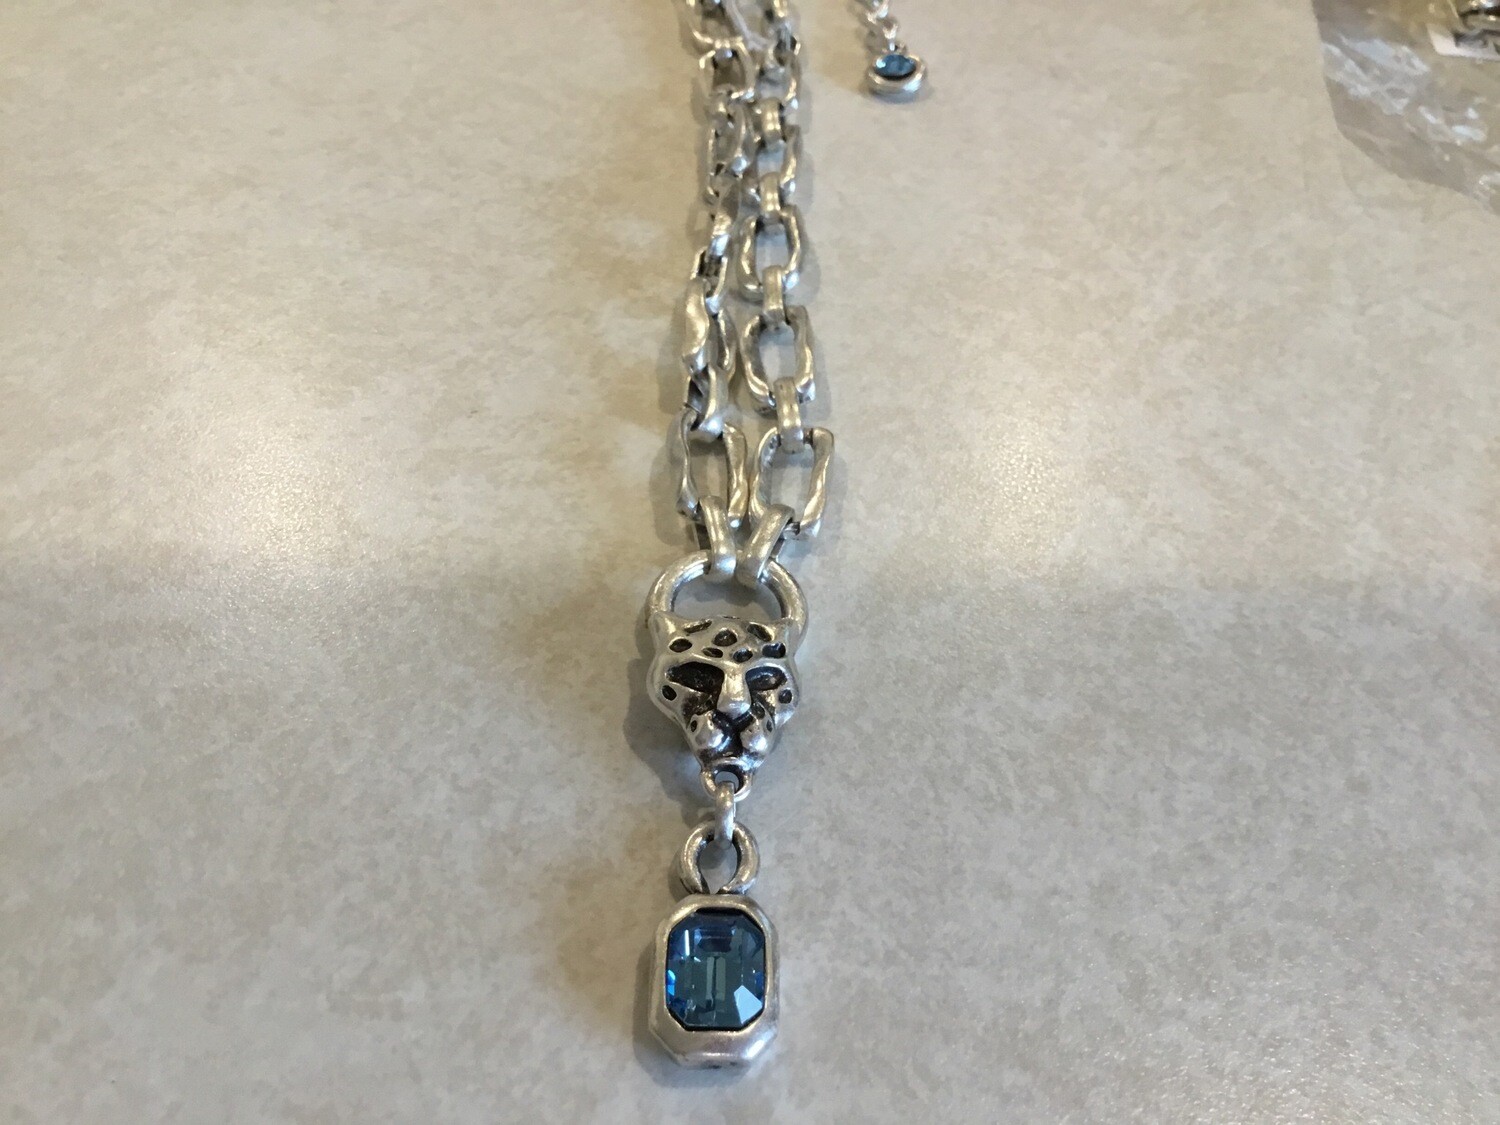 Handmade Pewter Medium Length Necklace With Cheetah And Blue Crystals